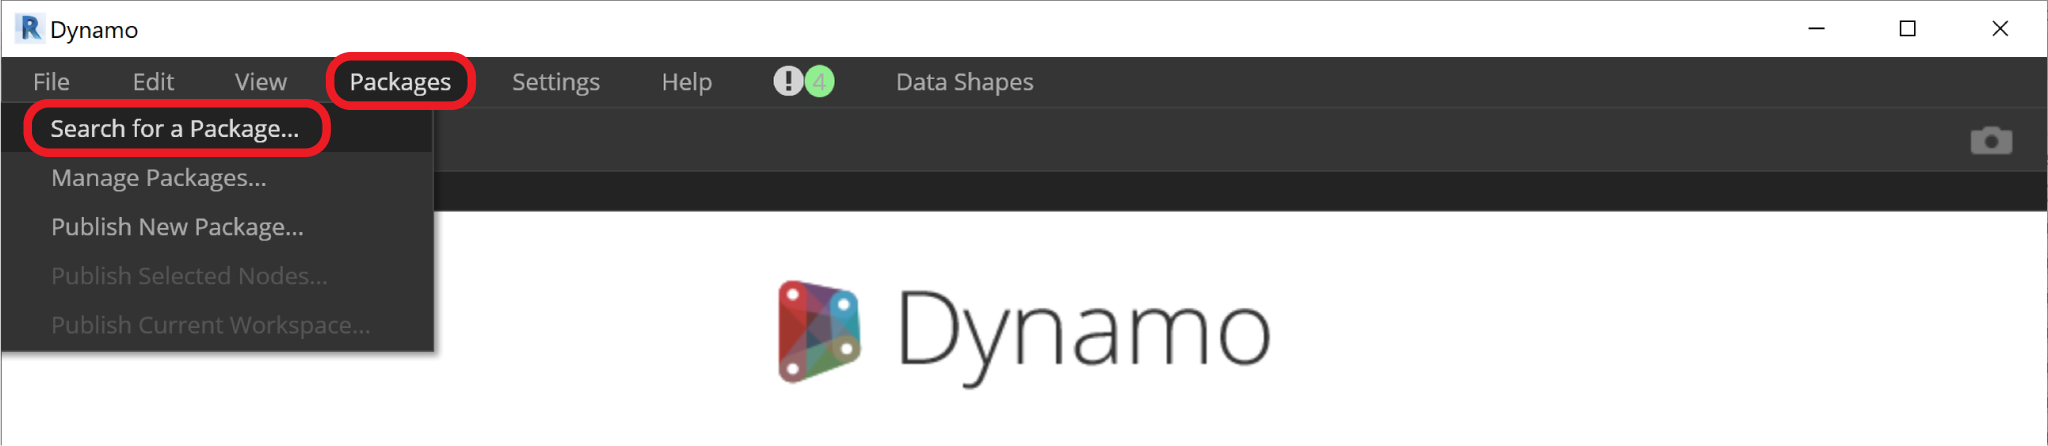 installer les packages dynamo